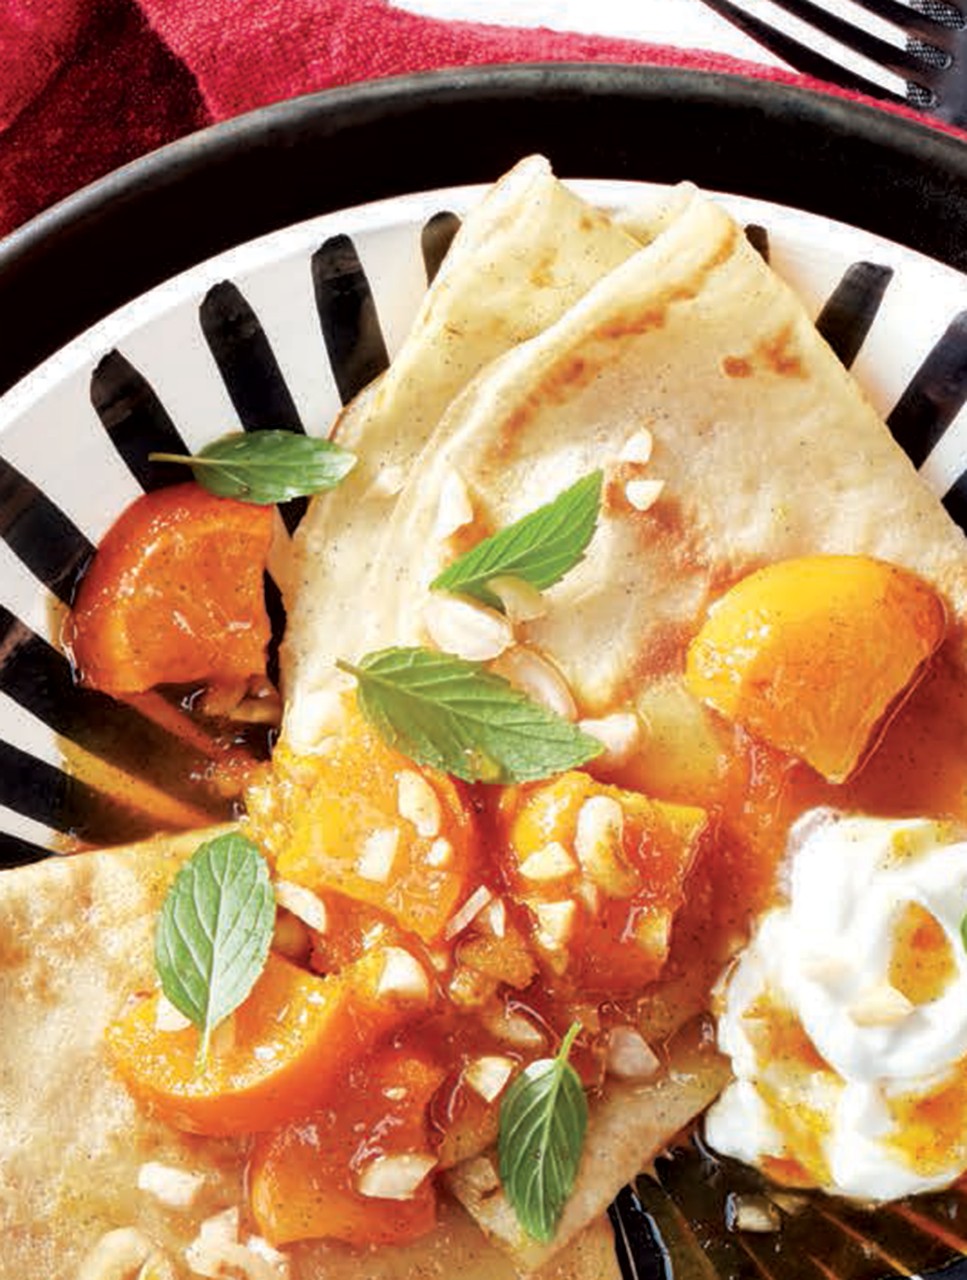 Vanilla Bean Crepes with Poached Persimmons